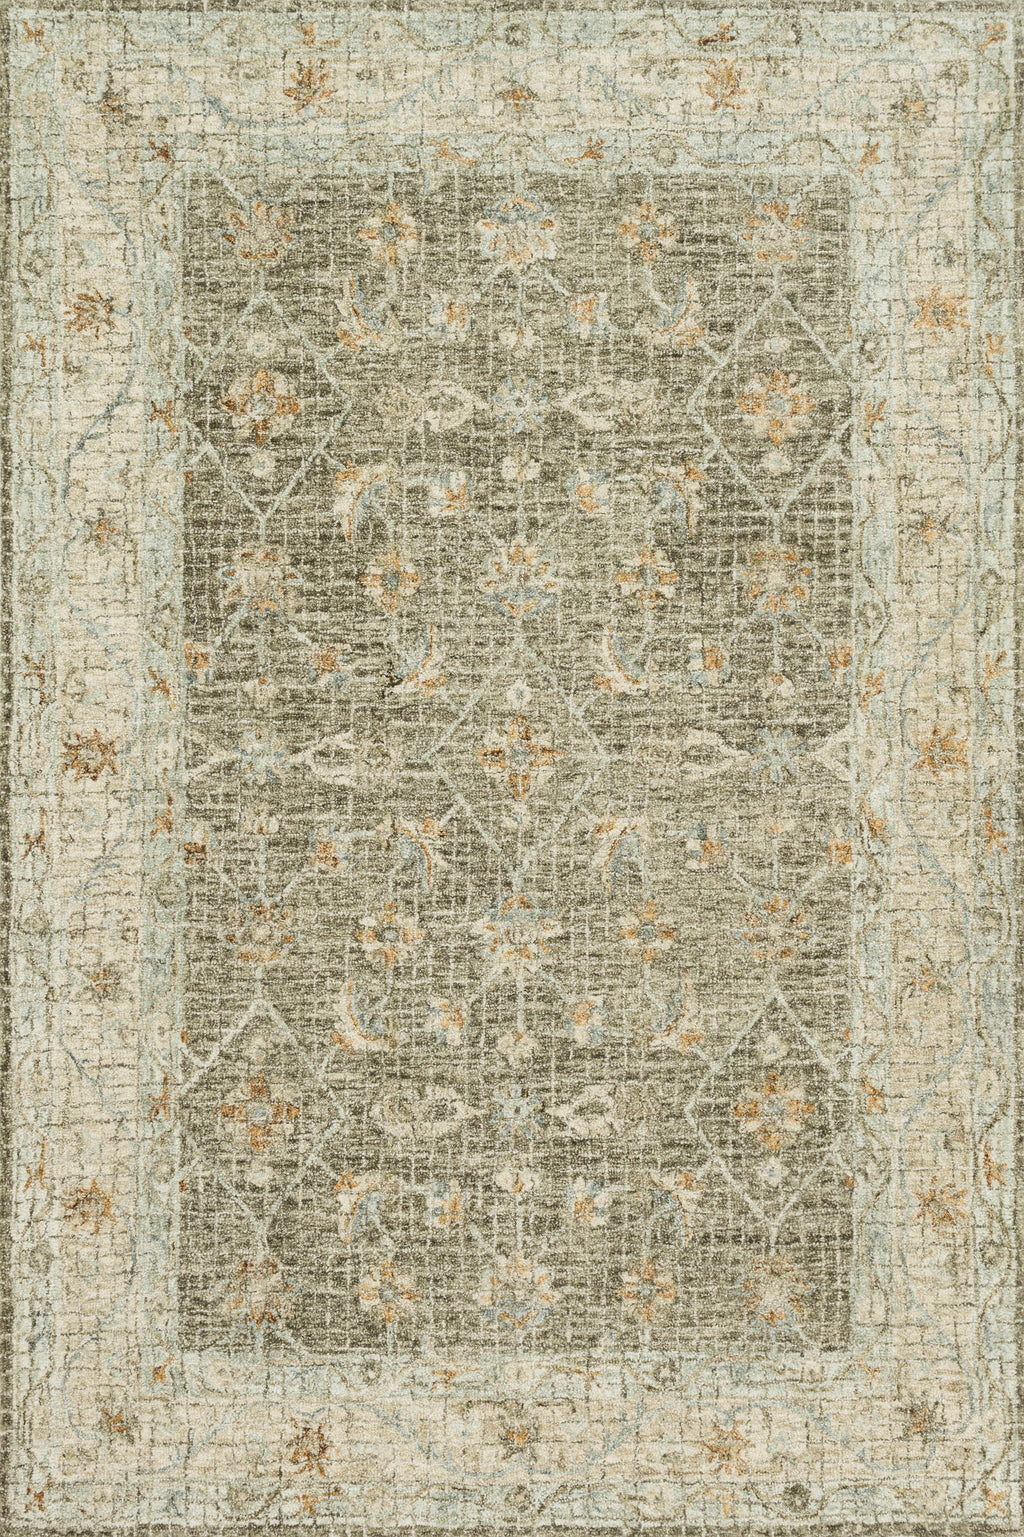 JULIAN Collection Wool Rug  in  TAUPE / SAND Beige Runner Hand-Hooked Wool